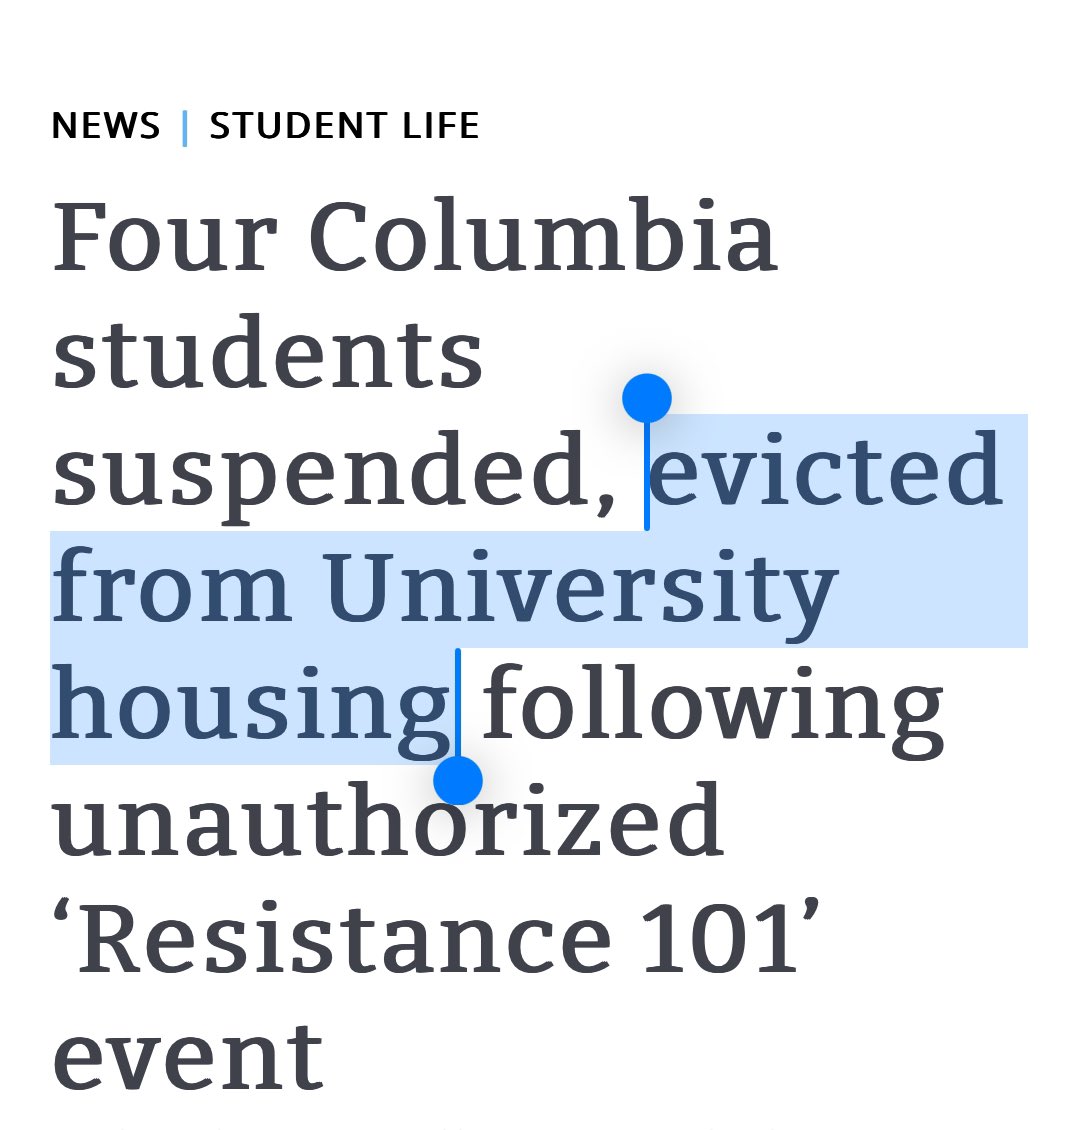 @Princeton UPDATE: The two @Princeton students who were arrested will also be evicted. Almost like there’s a pattern here.